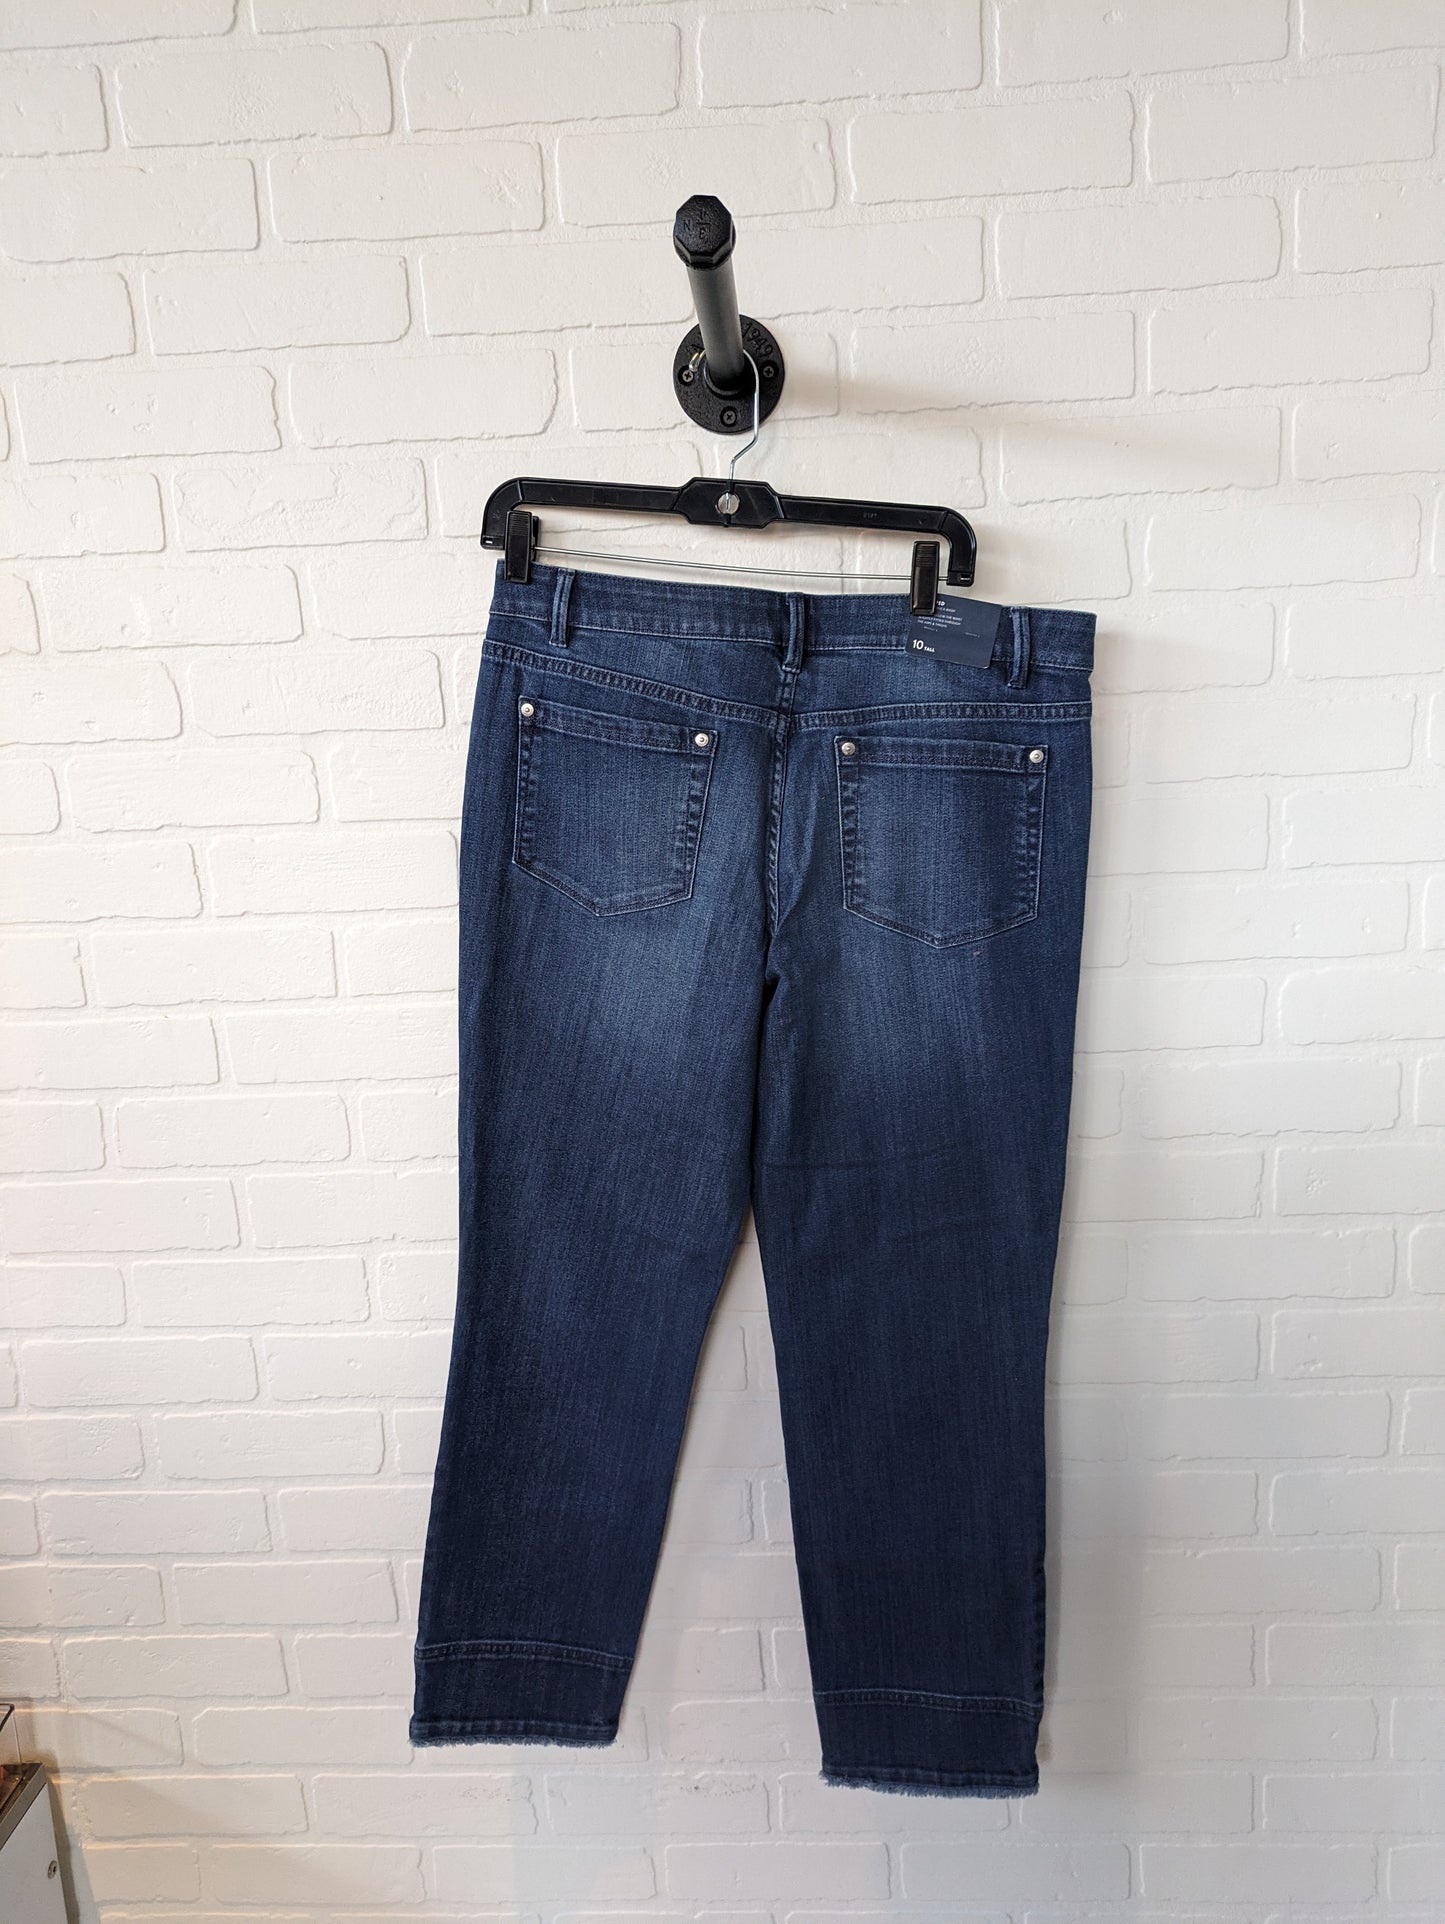 Jeans Cropped By J Jill  Size: 10tall